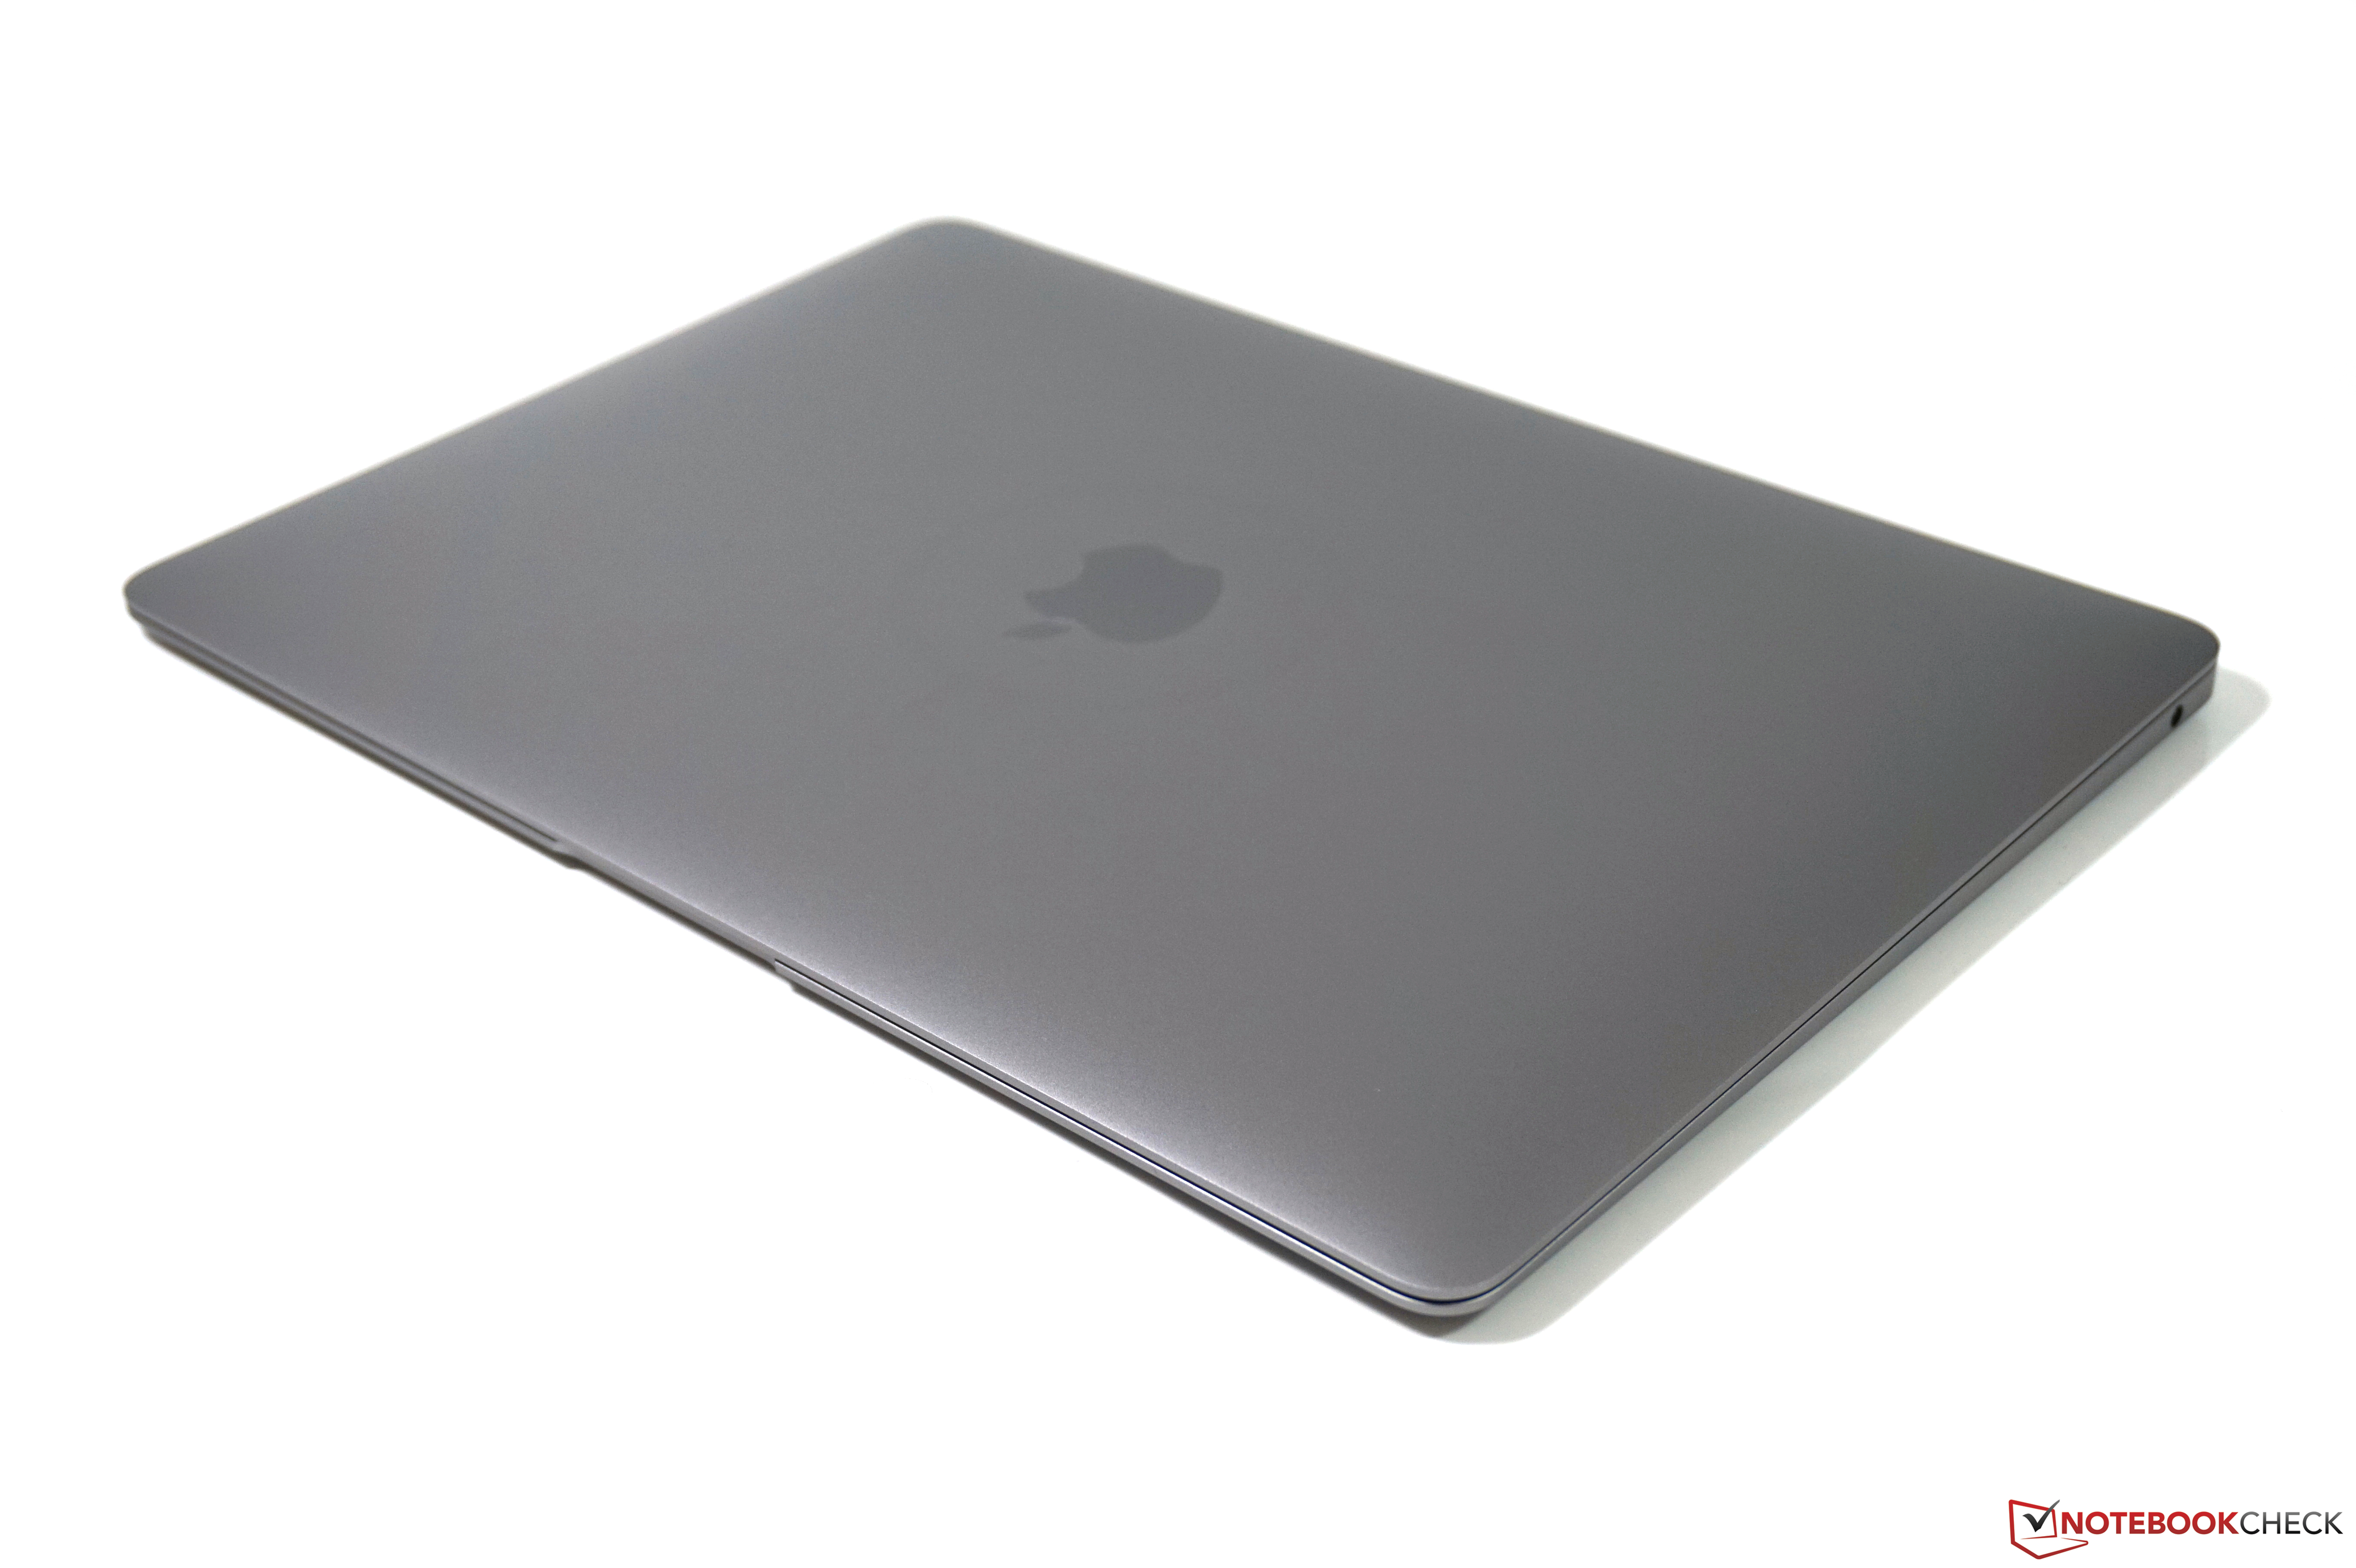 Apple MacBook Air 2018 (i5, 256 GB) Laptop Review - NotebookCheck 